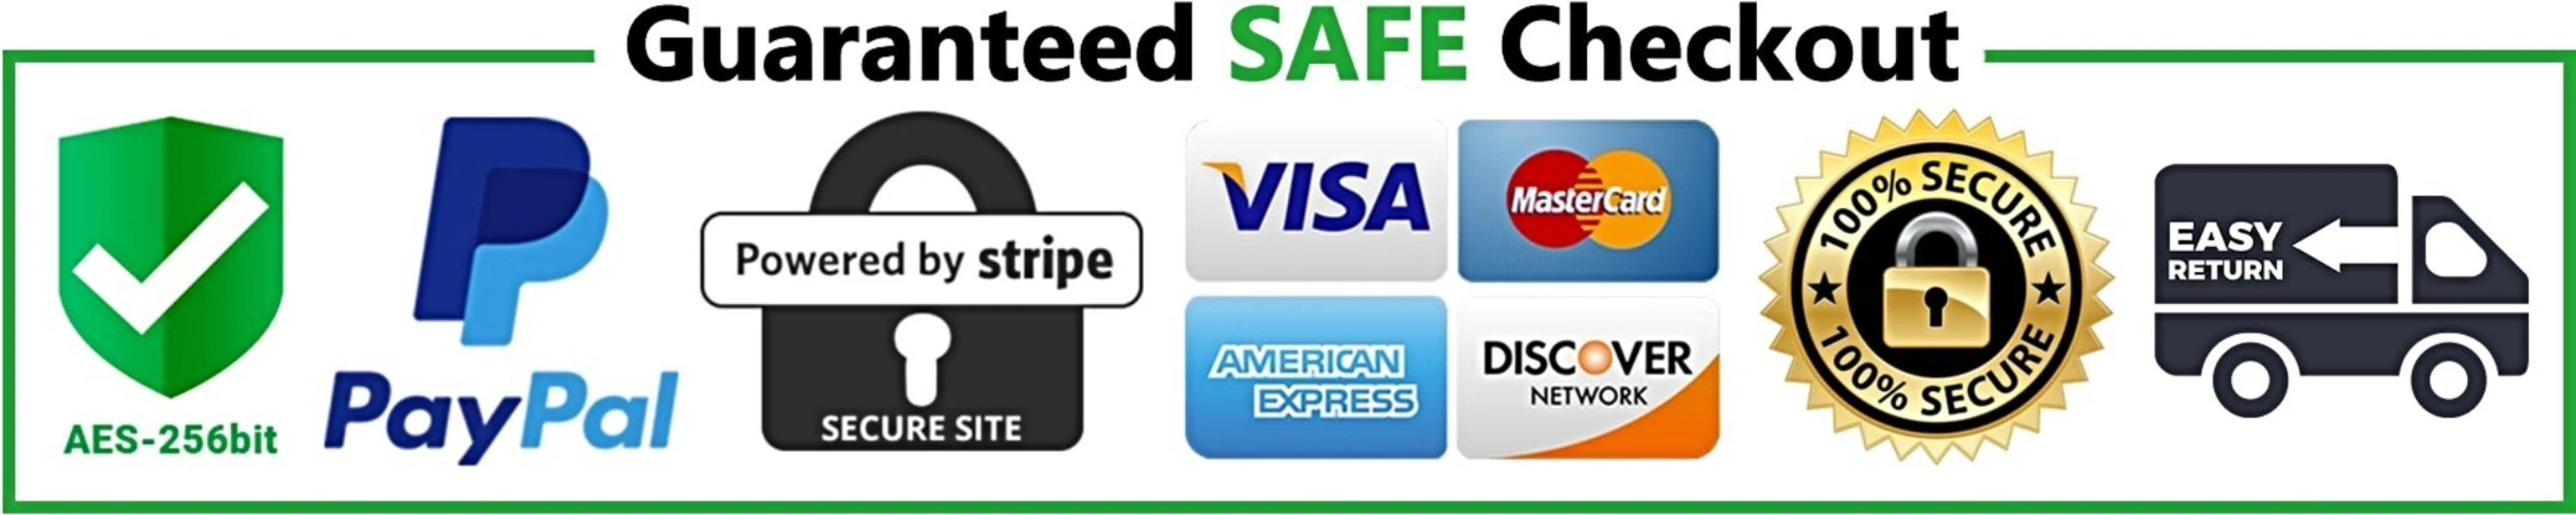 Safe and secure. Secure checkout. Guaranteed safe checkout. PAYPAL safe and secure. Secure payment guarantee.